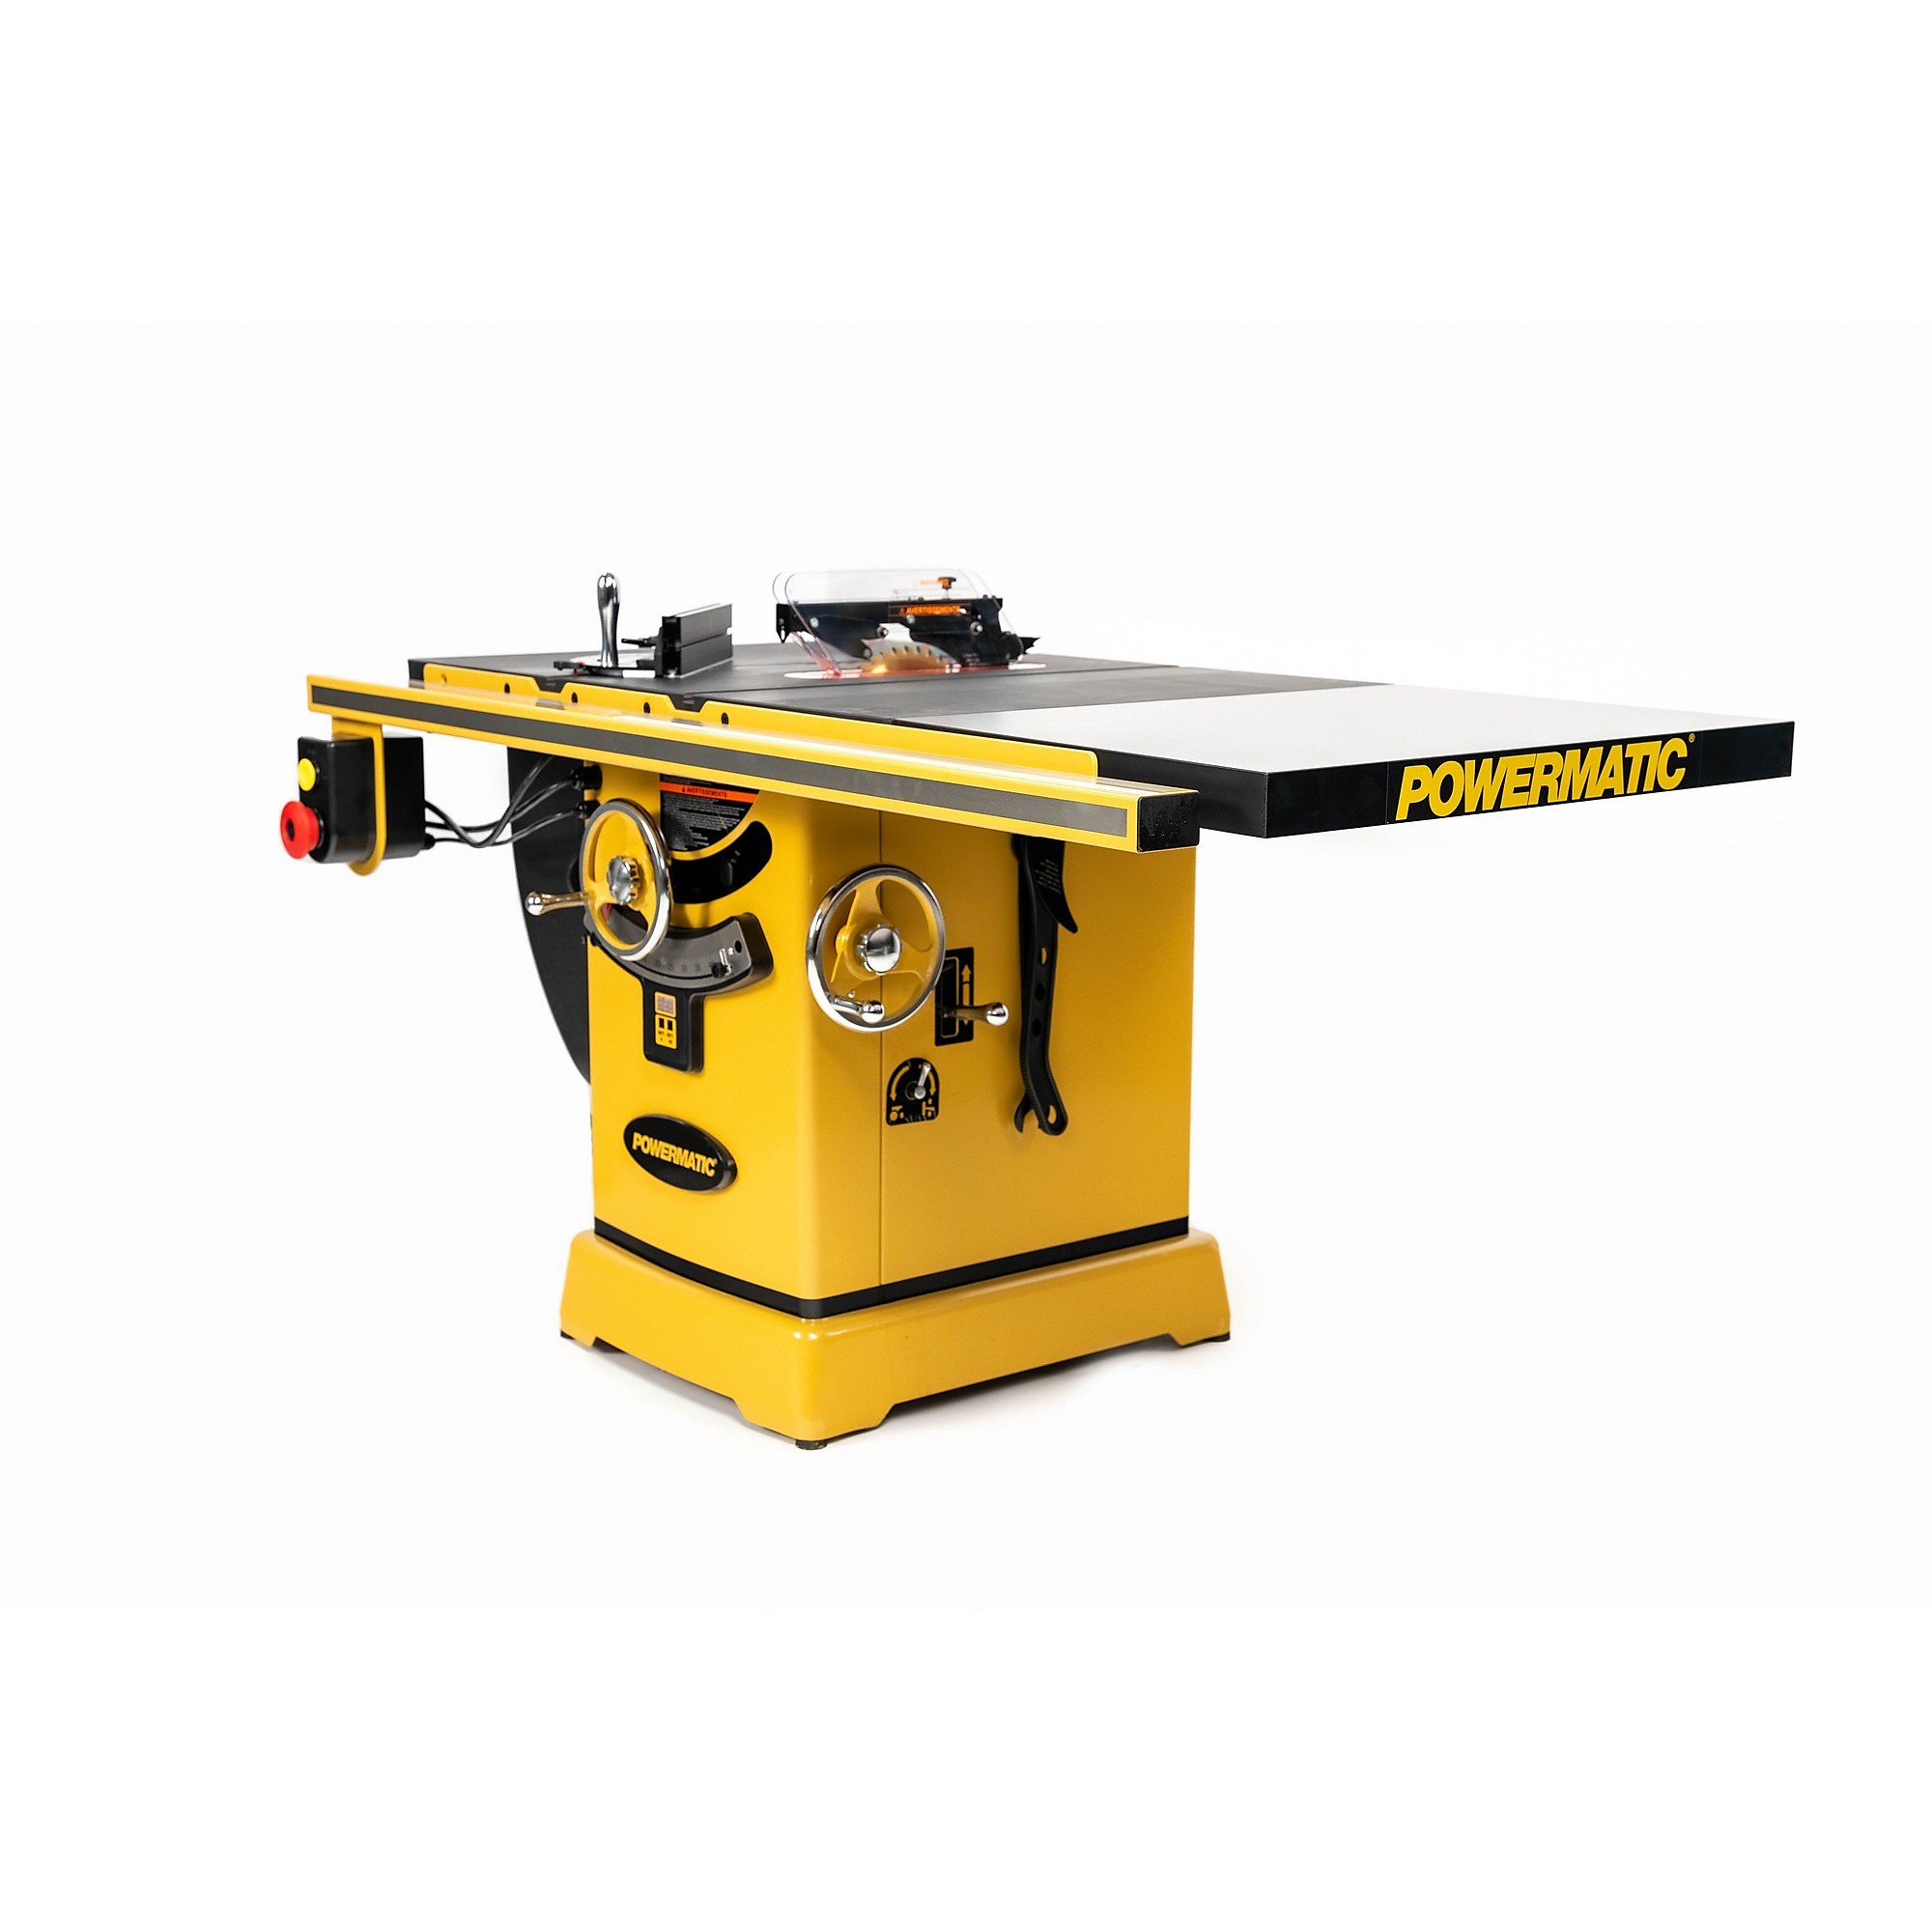 Powermatic, ArmorGlide Table Saw, Blade Diameter 10 Horsepower 1.75 HP, Volts 115 Model PM1000T -  1791000KT